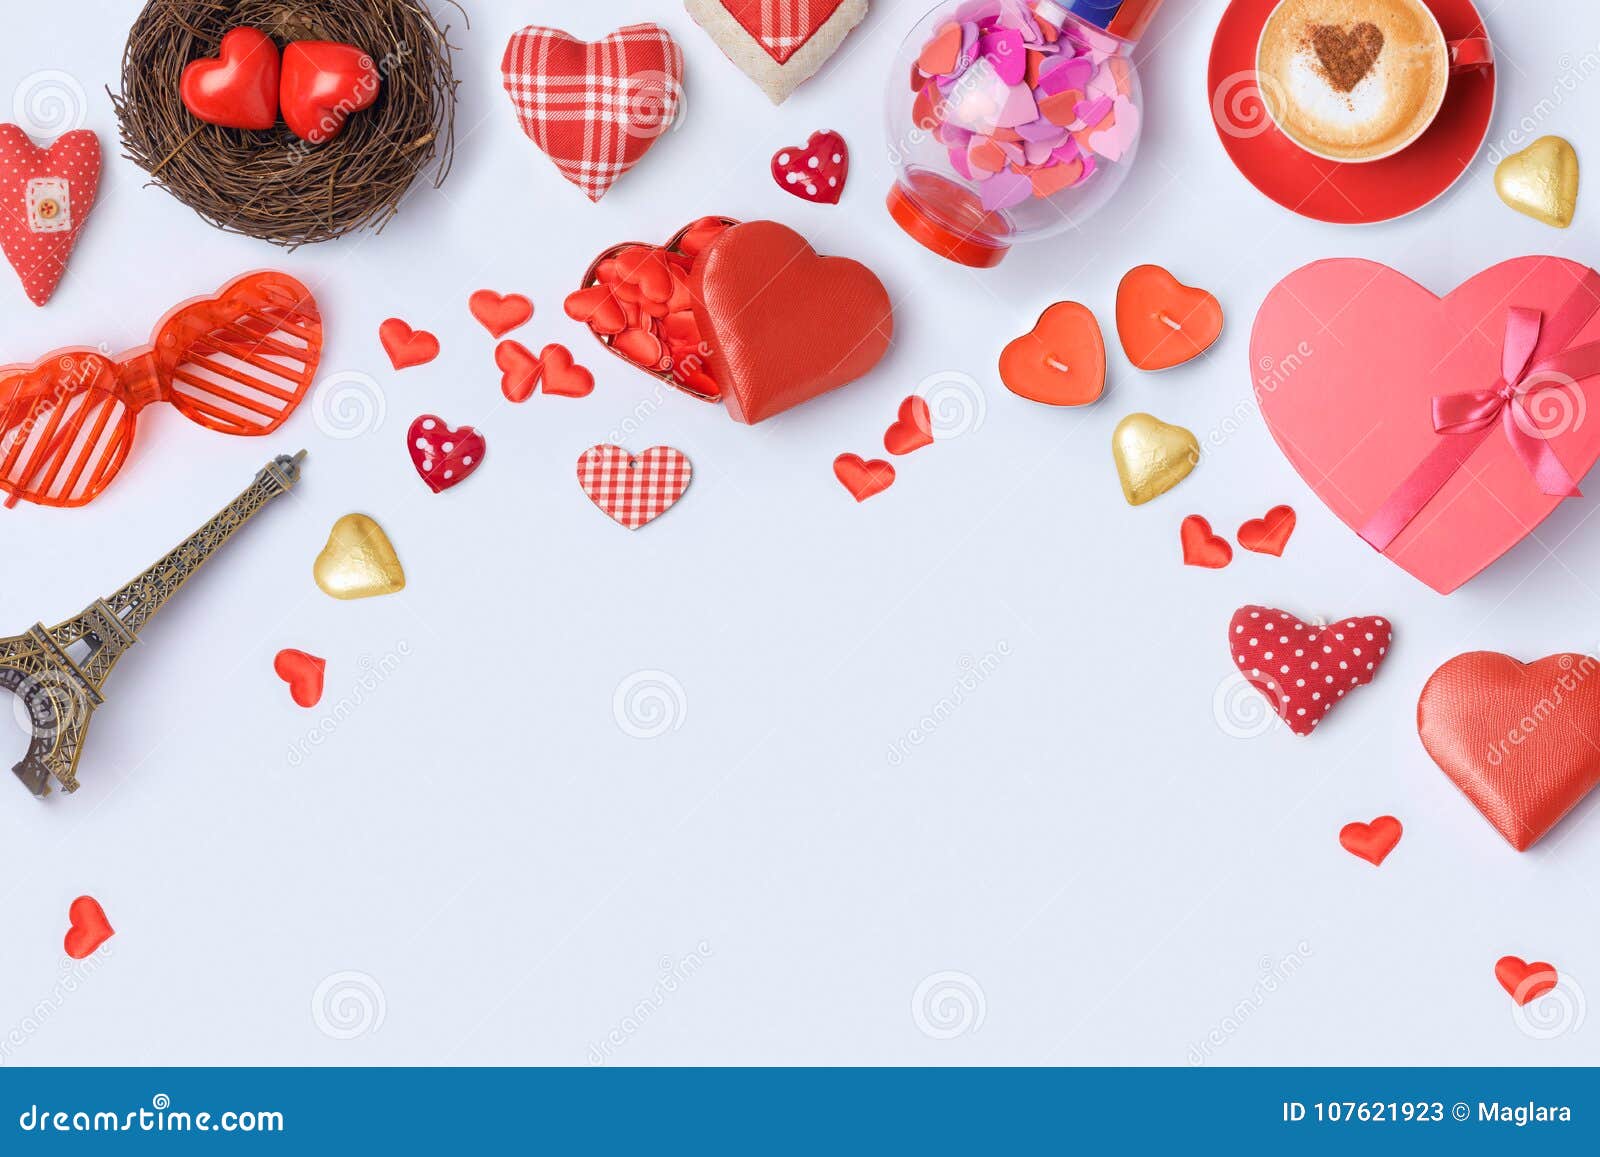 Valentines day concept stock image. Image of holiday - 107621923